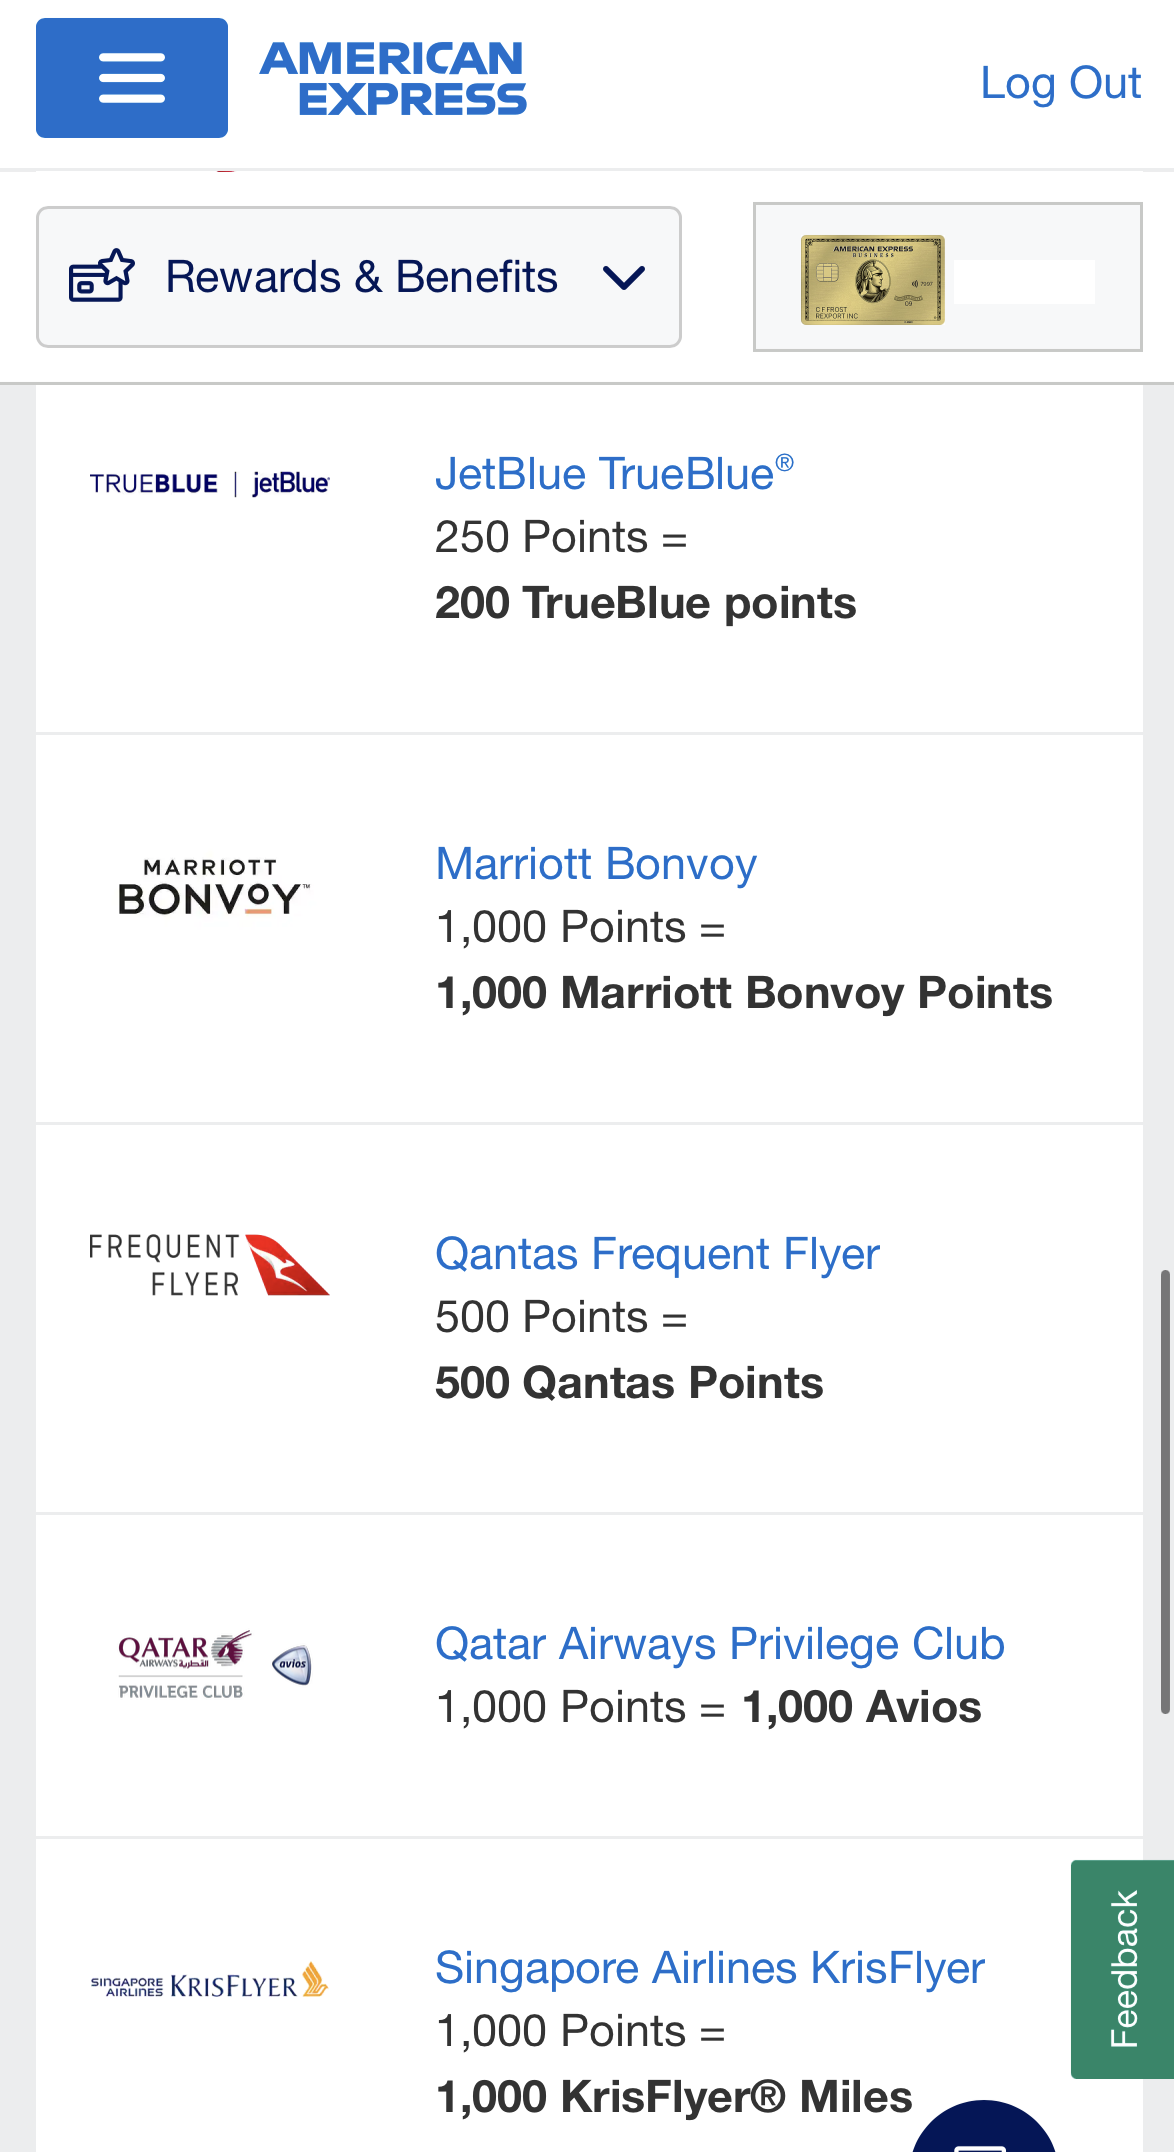 Amex Transfer points to Airline and Hotels - JetBlue, Marriot Bonvoy, Qatar Airways, Singapore Airlines